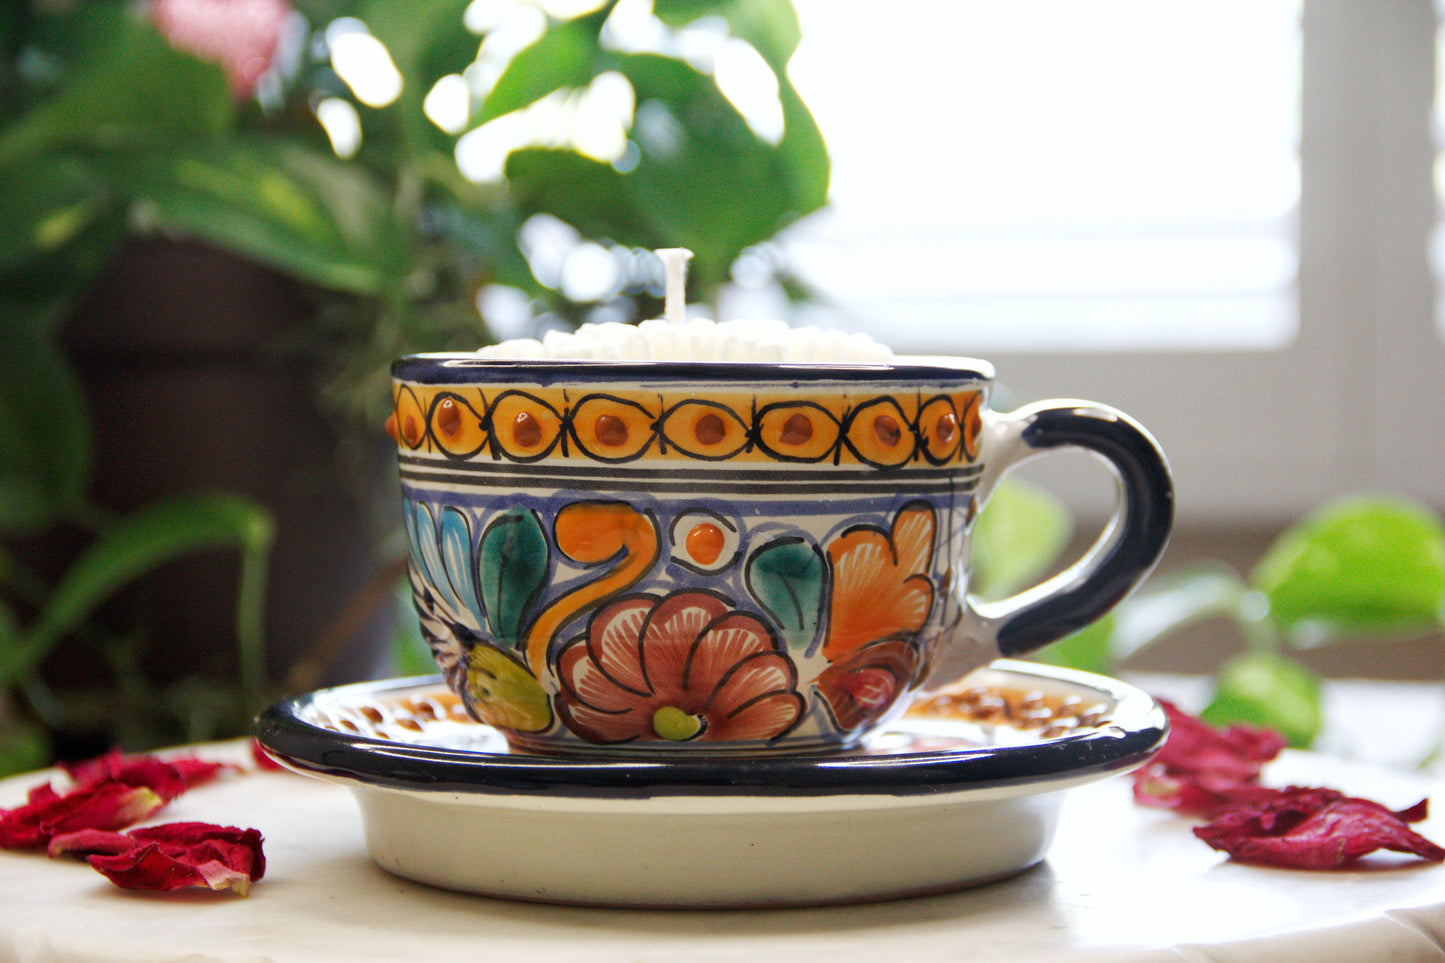 Artisanal candle in a beautiful multicolored talavera cup and plate. Handcrafted by Artisan in Puebla, Mexico. 100% All Natural Soy Candle. Reuse the talavera as home decor or storage.